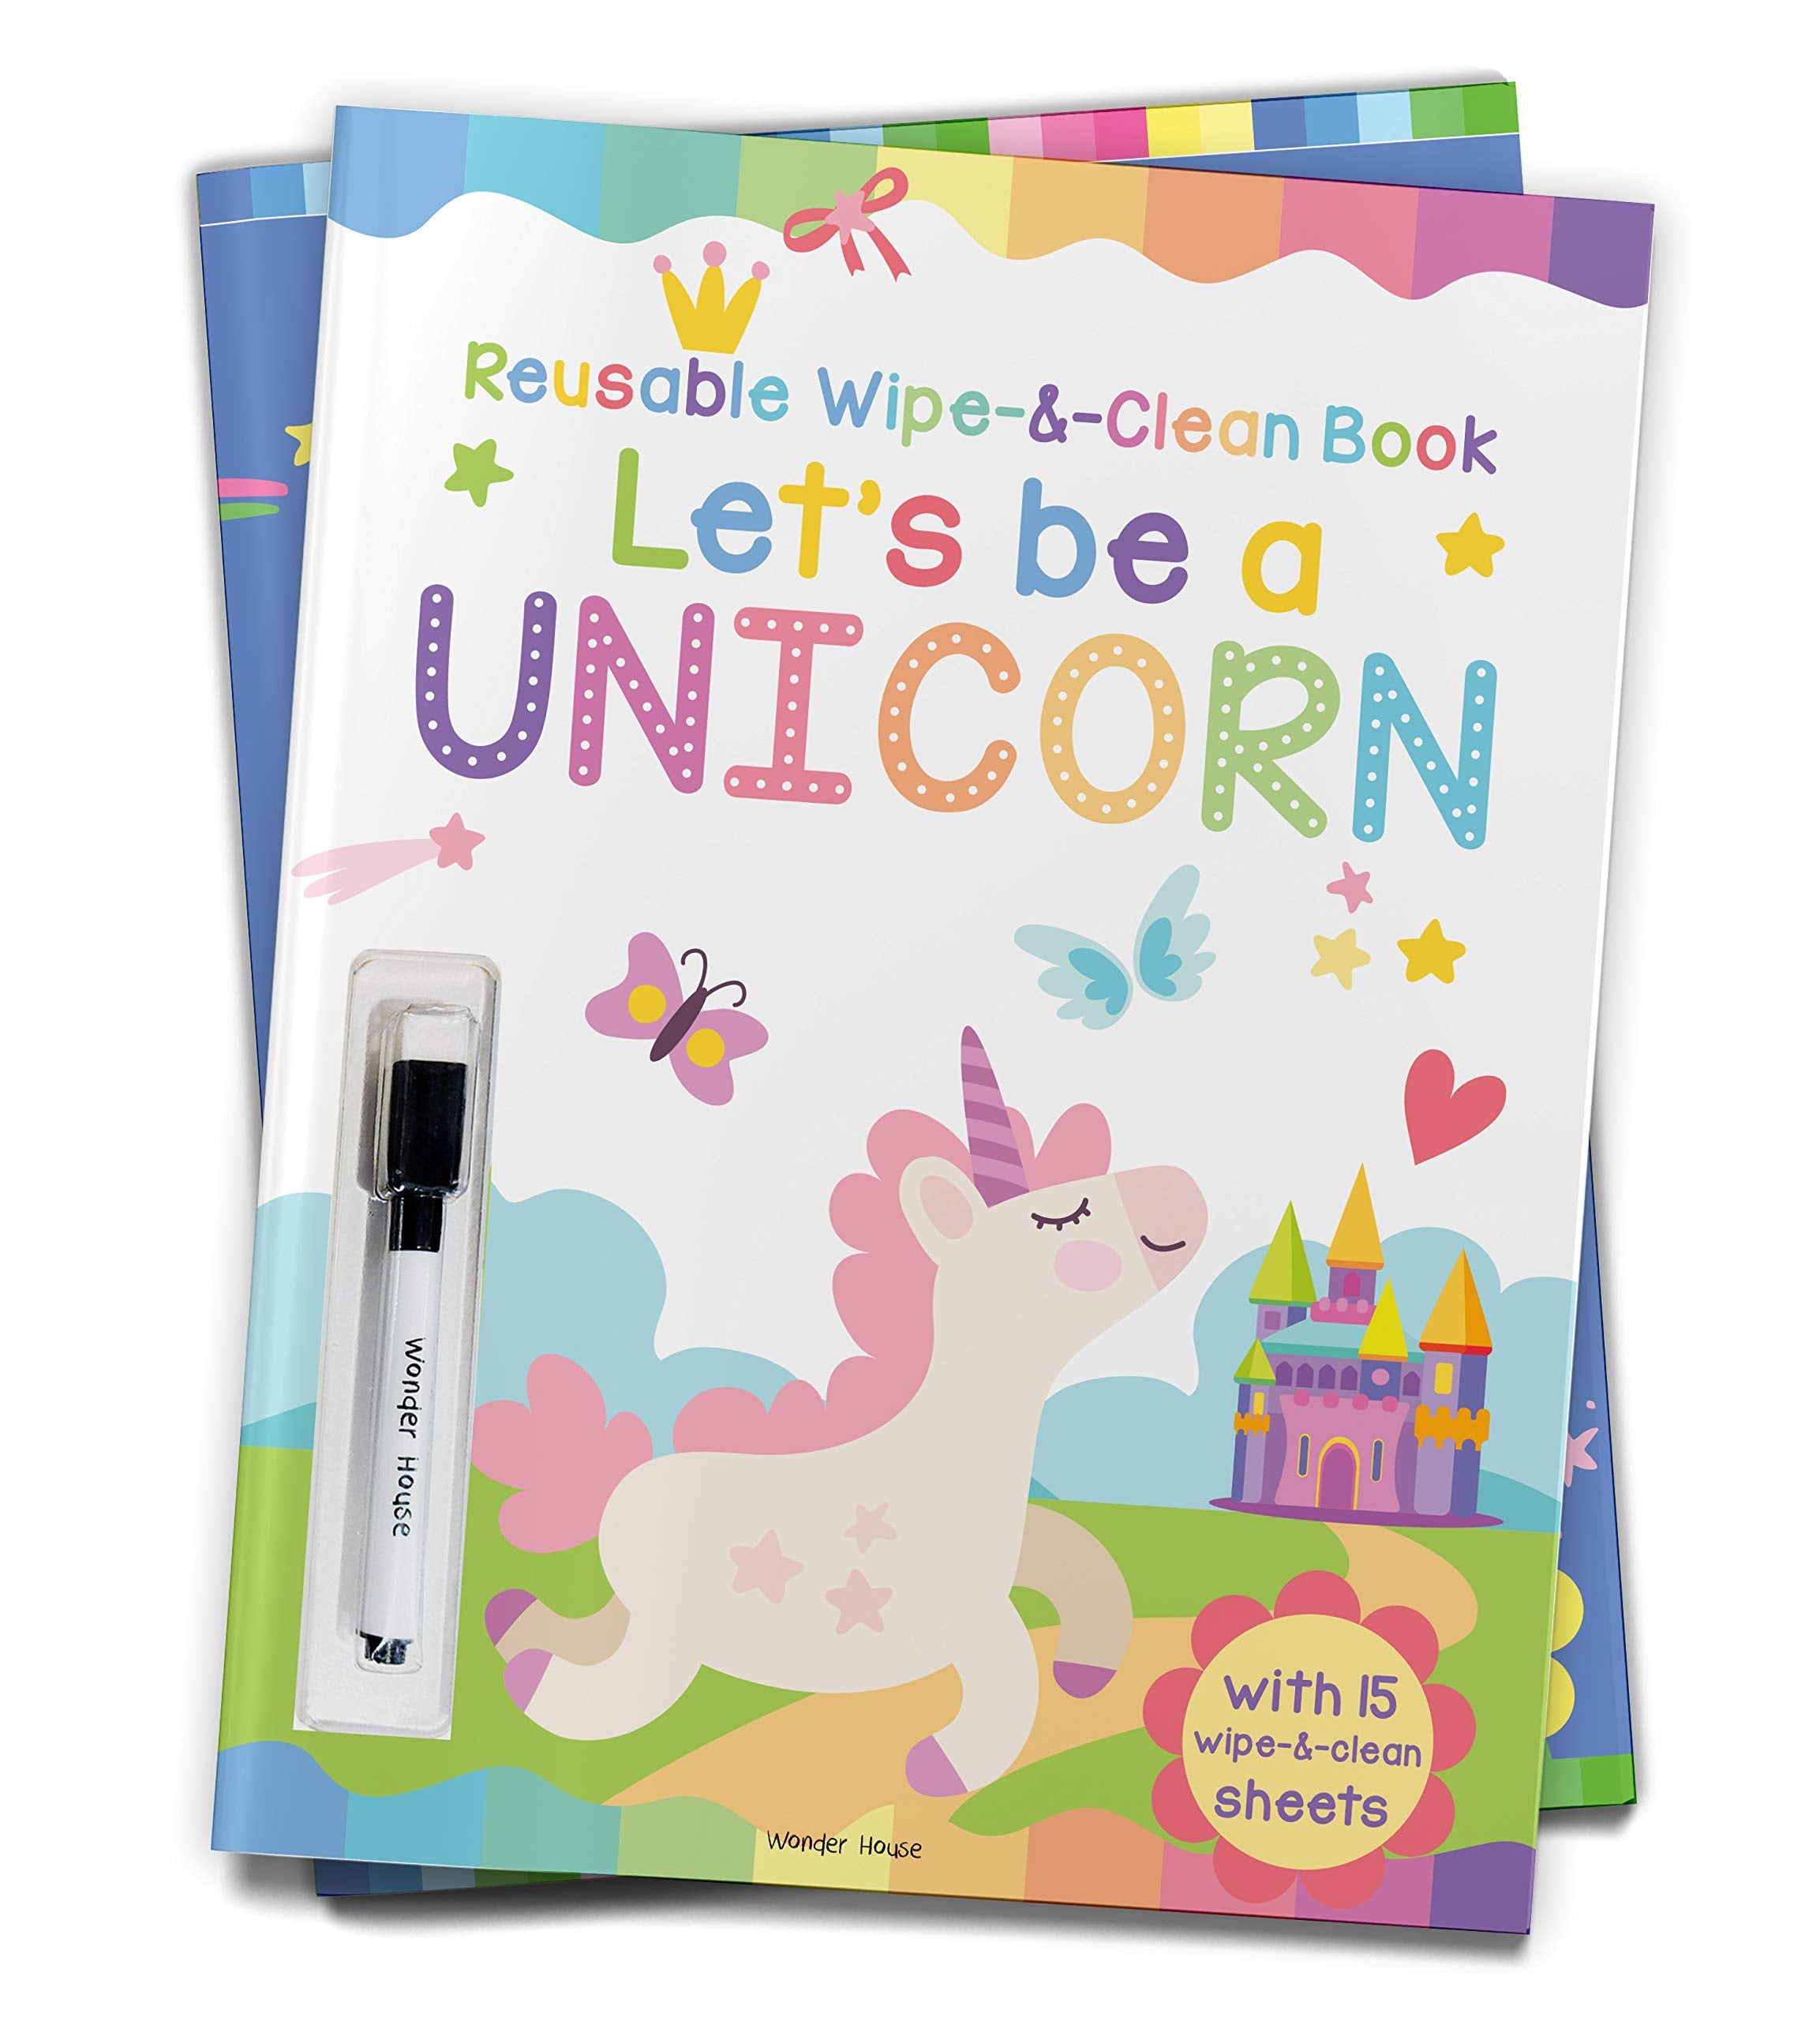 Let's be a Unicorn - Reusable Wipe And Clean Activity Book